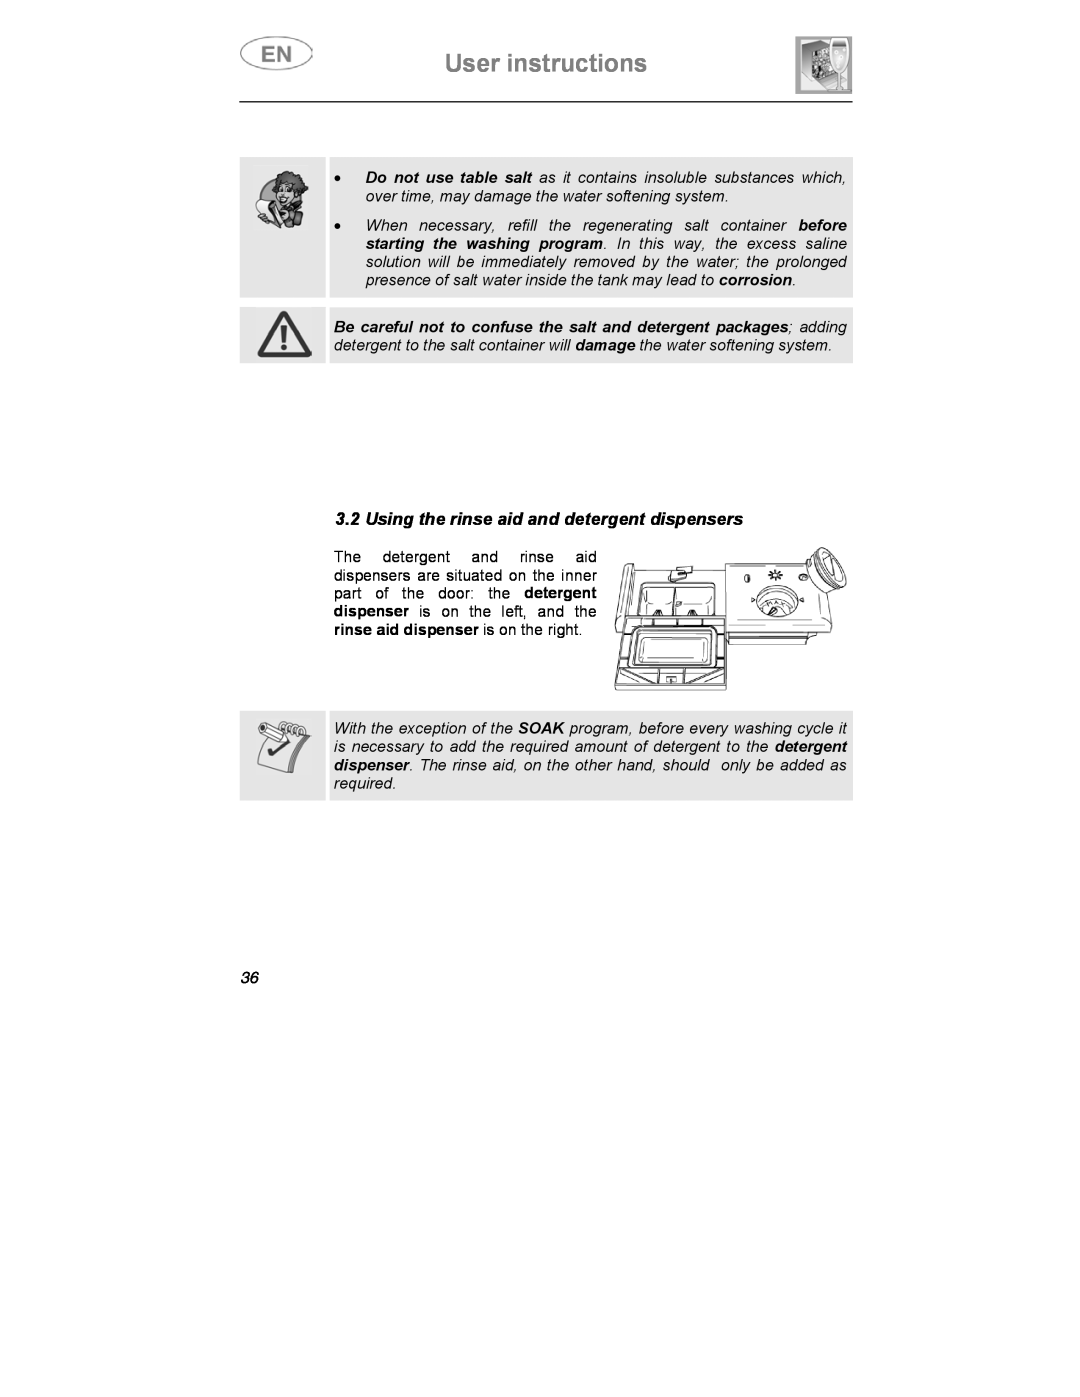 Smeg CA01-3 instruction manual User instructions, Using the rinse aid and detergent dispensers 